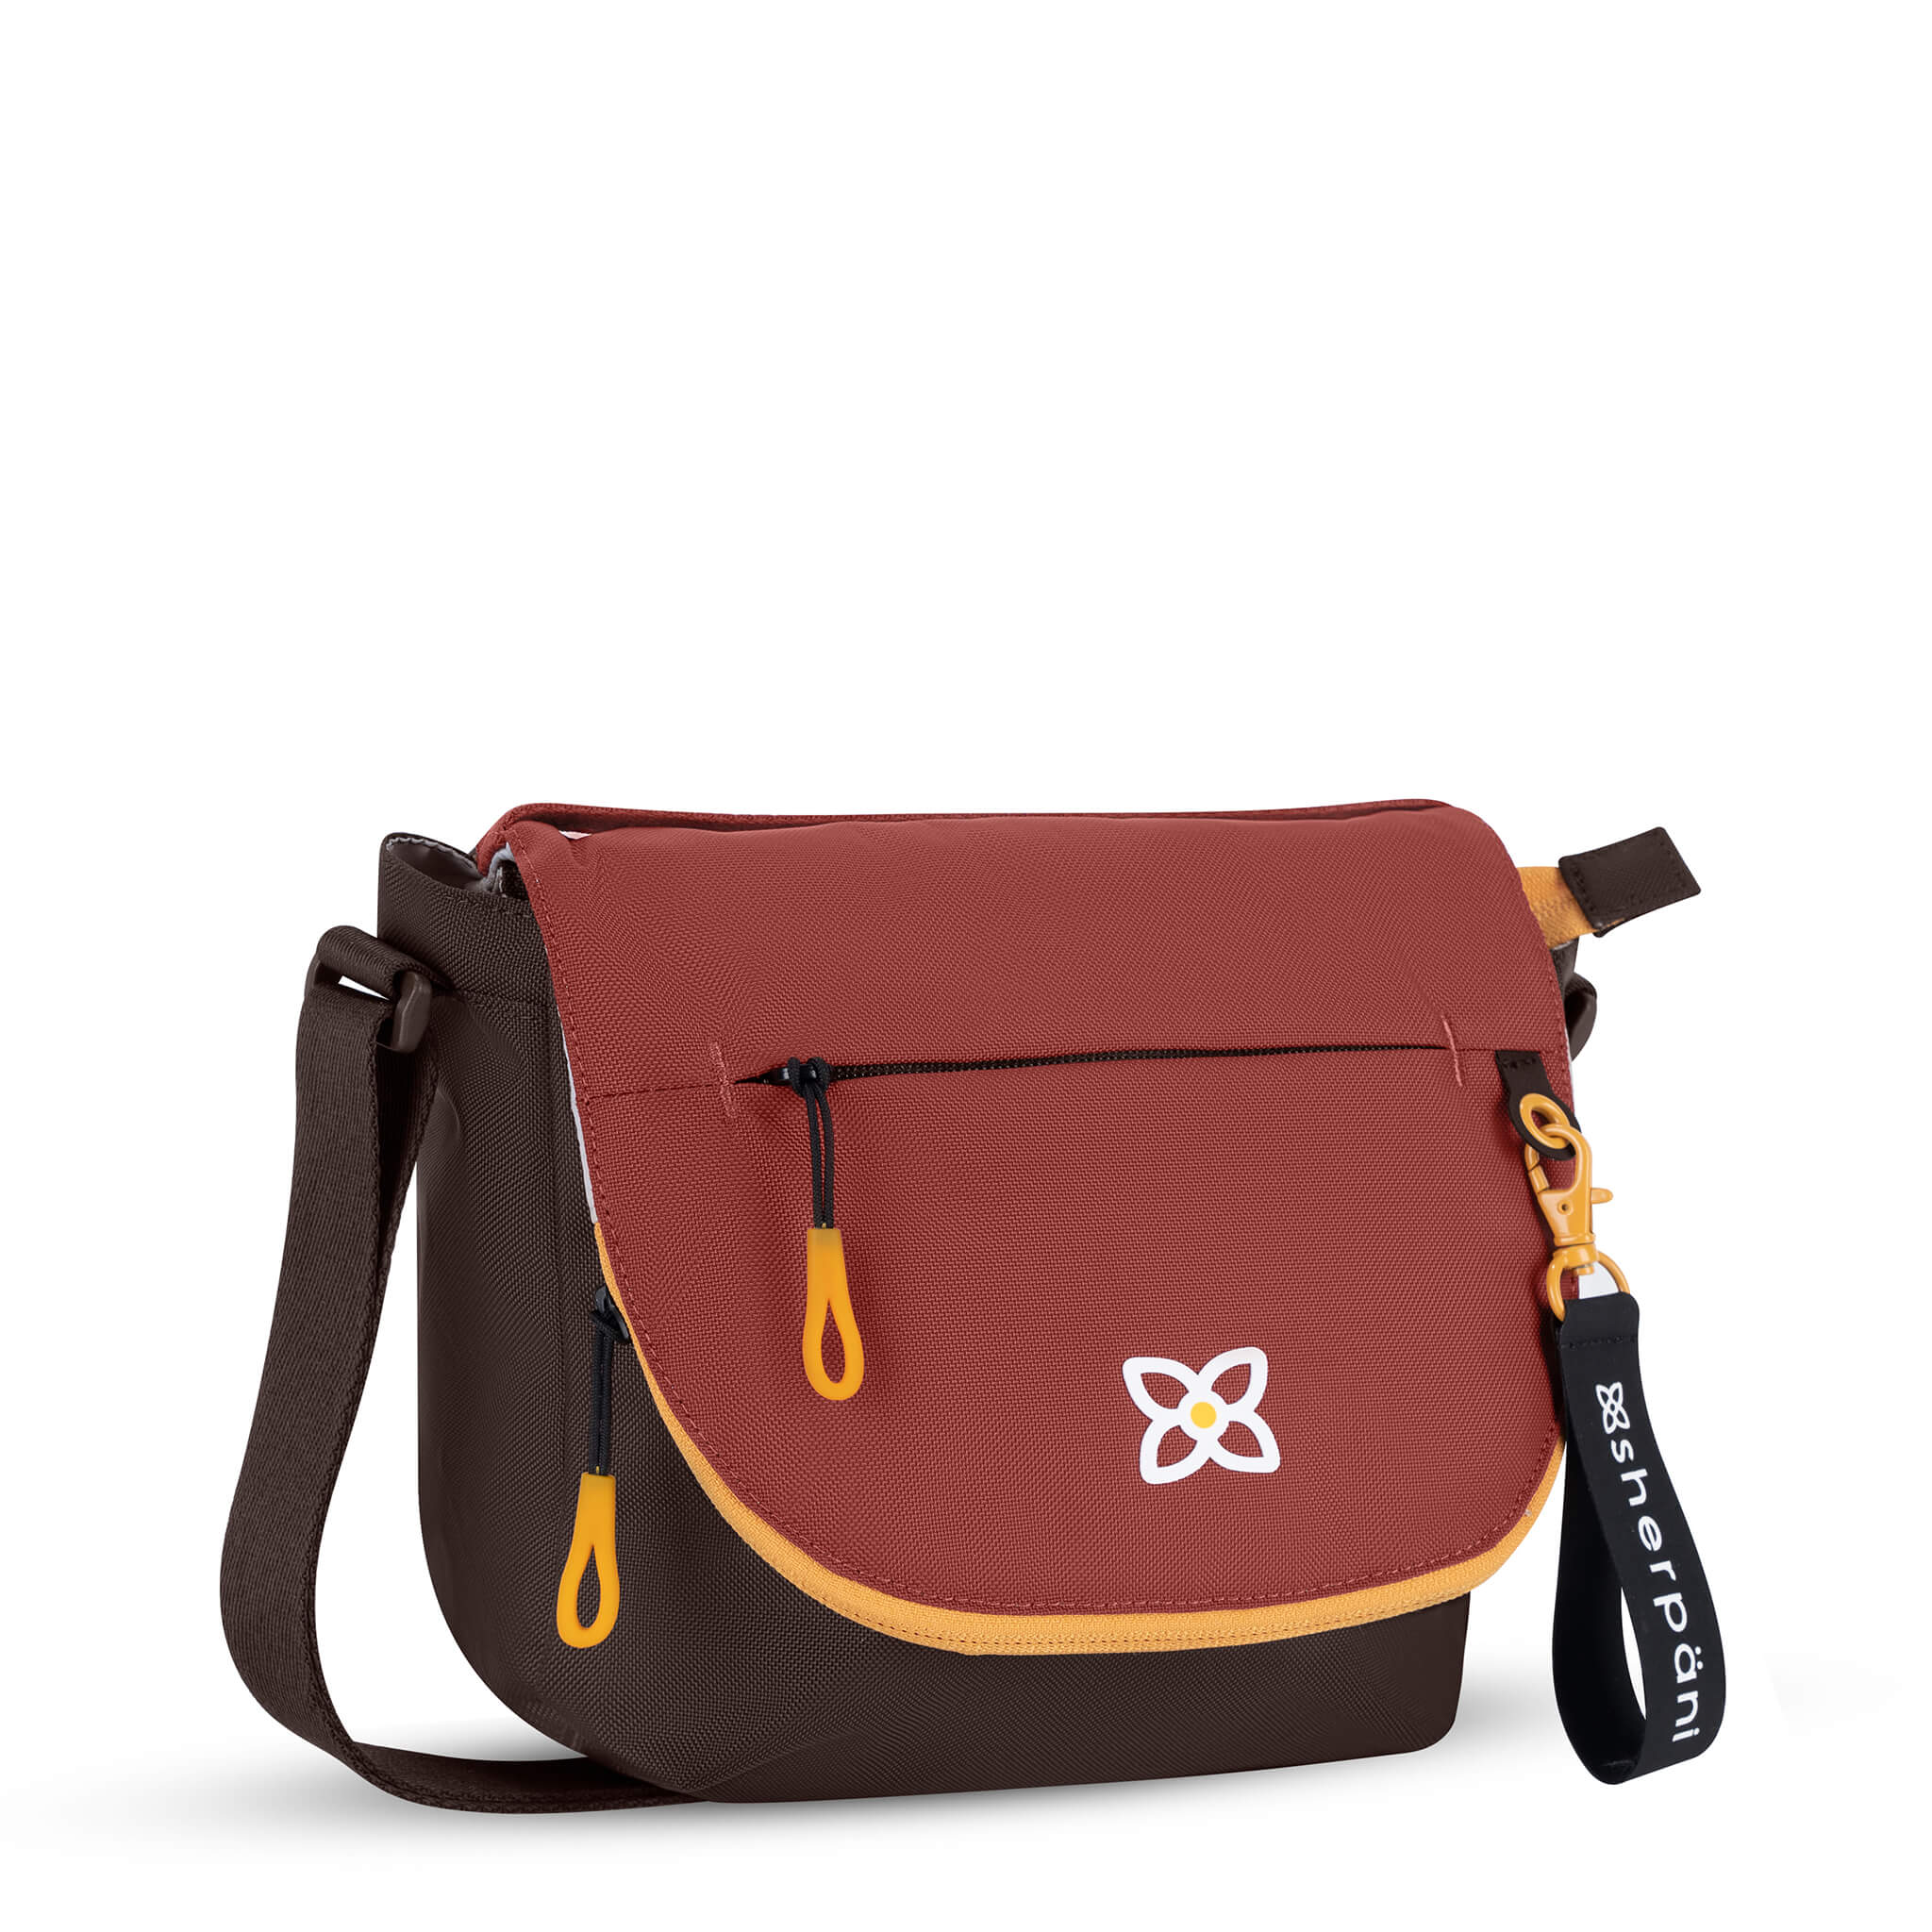 Angled front view of Sherpani messenger satchel bag, the Milli in Cider. Milli features include an adjustable crossbody strap, front zipper pocket, brimmed zipper pocket, detachable keychain, magnetic closure, RFID security and multiple internal pockets for organization. The Cider color is two-toned in burgundy and dark brown with yellow accents.